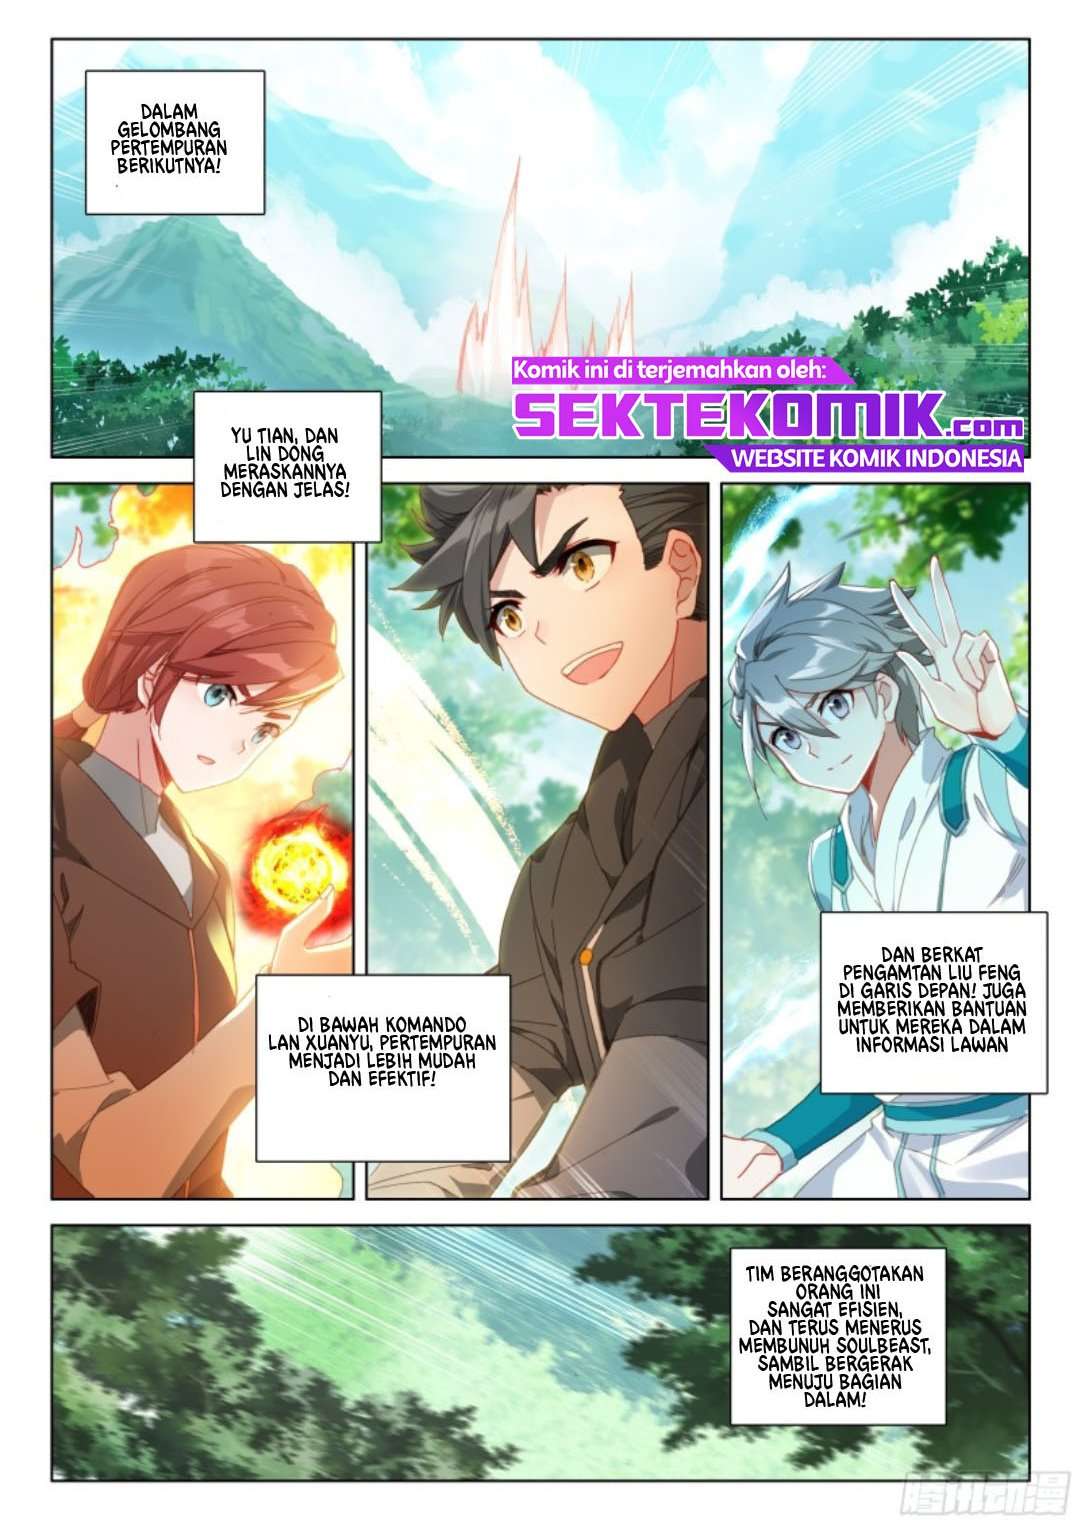 Soul Land IV – The Ultimate Combats Chapter 123